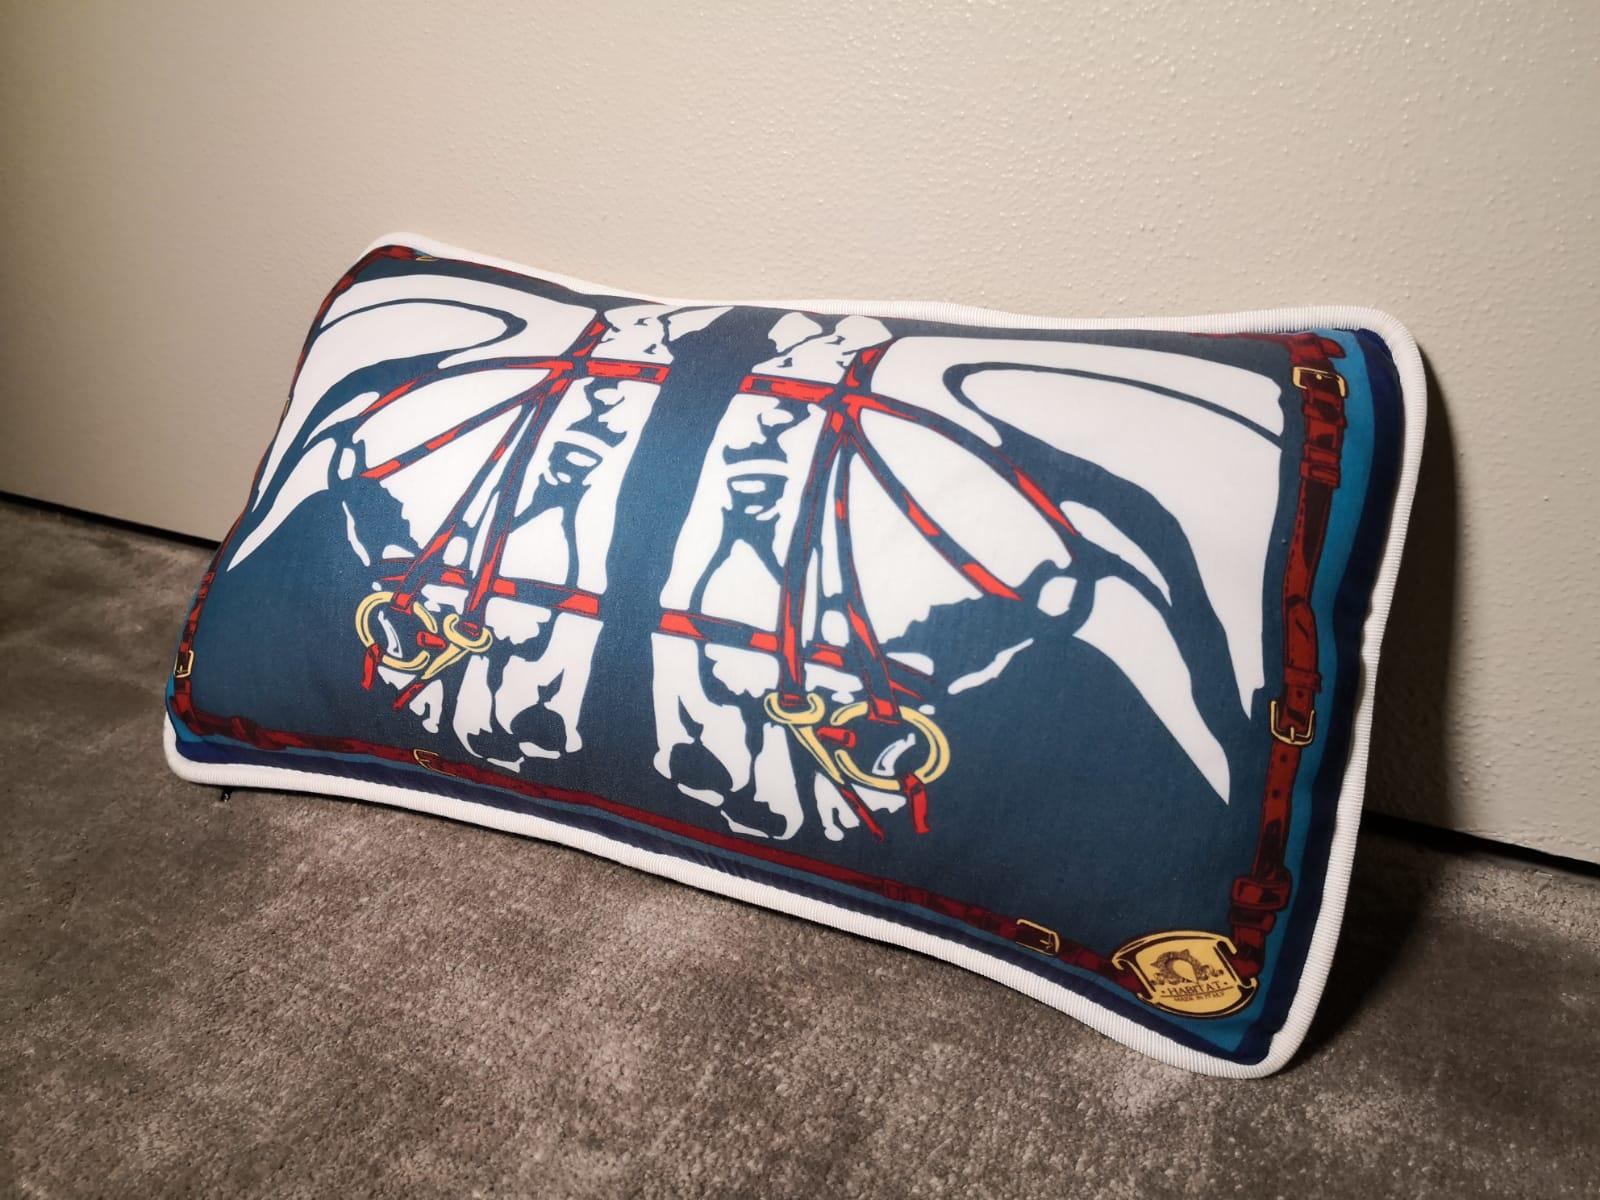 A polyester and velvet (on the back) pillow pillow showing a contemporary horse heads with horesebit an belts.The main colors are blu and red. It's available in other colors, which you can see in our main board.
This pillow comes out as a set of